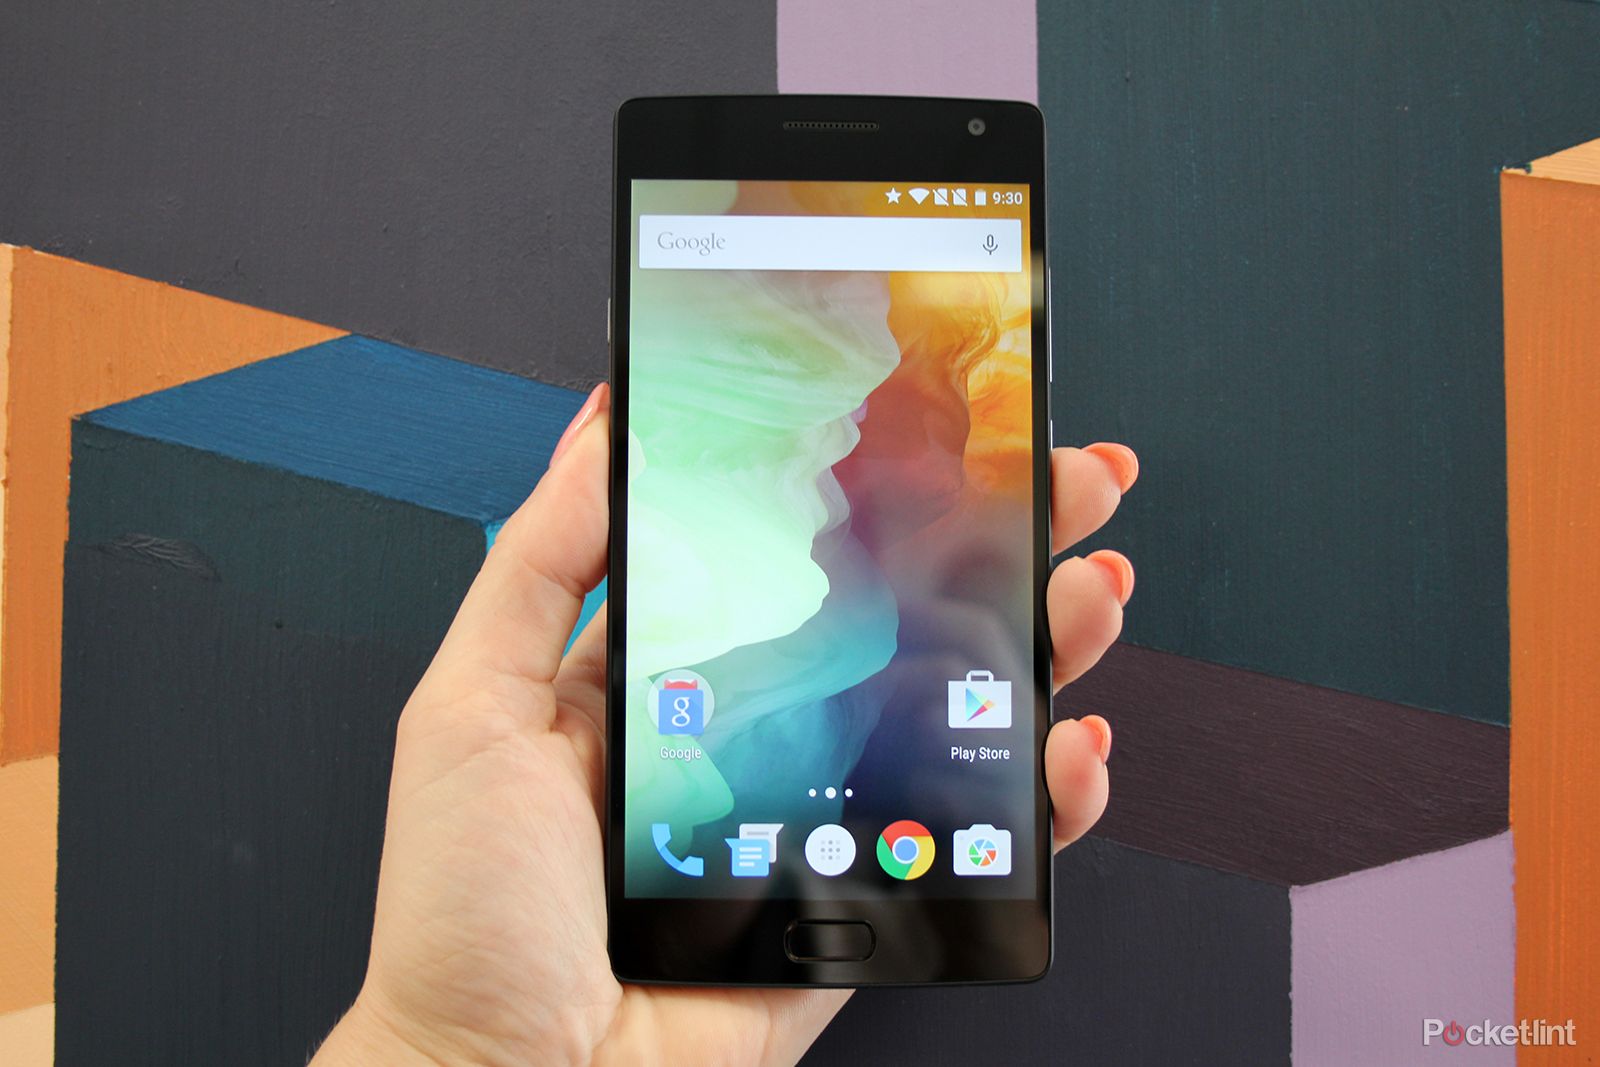 oneplus 2 and oneplus x software 7 features you must check out on oxygenos image 1